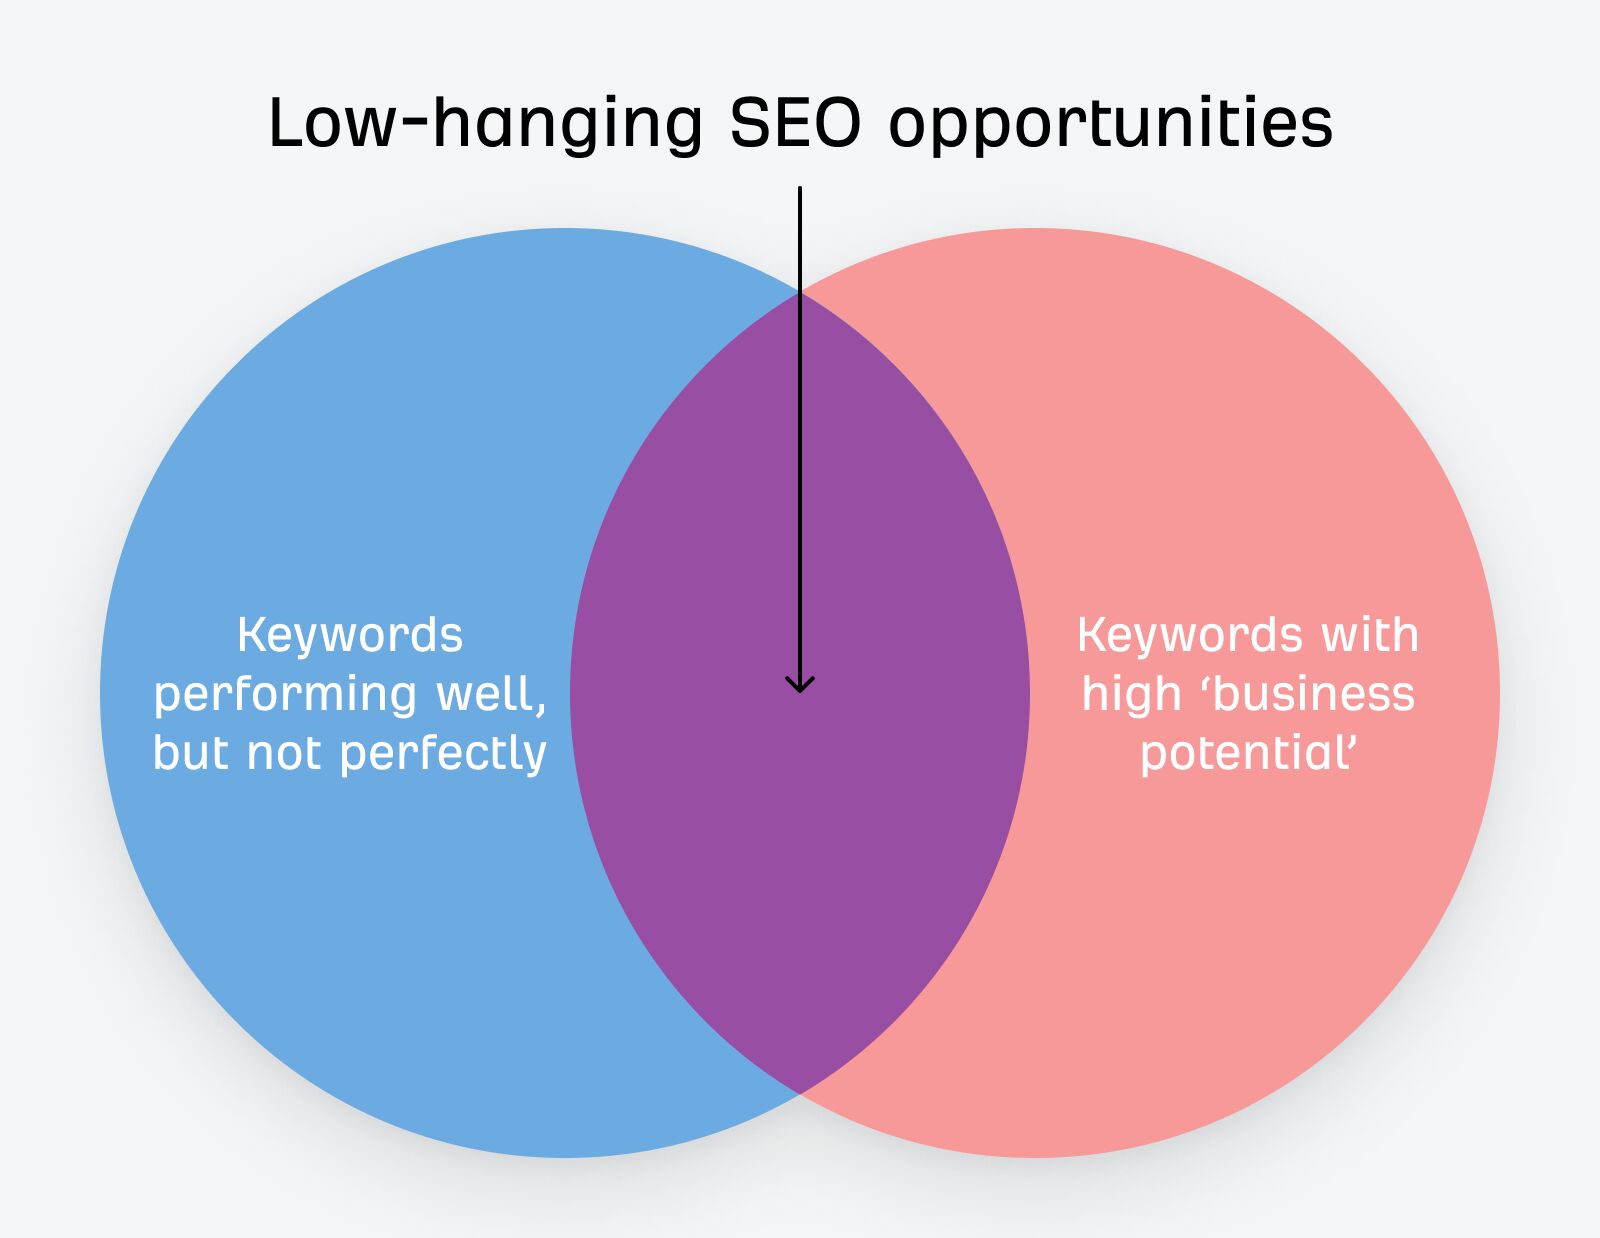 How to find low-hanging fruit SEO opportunities